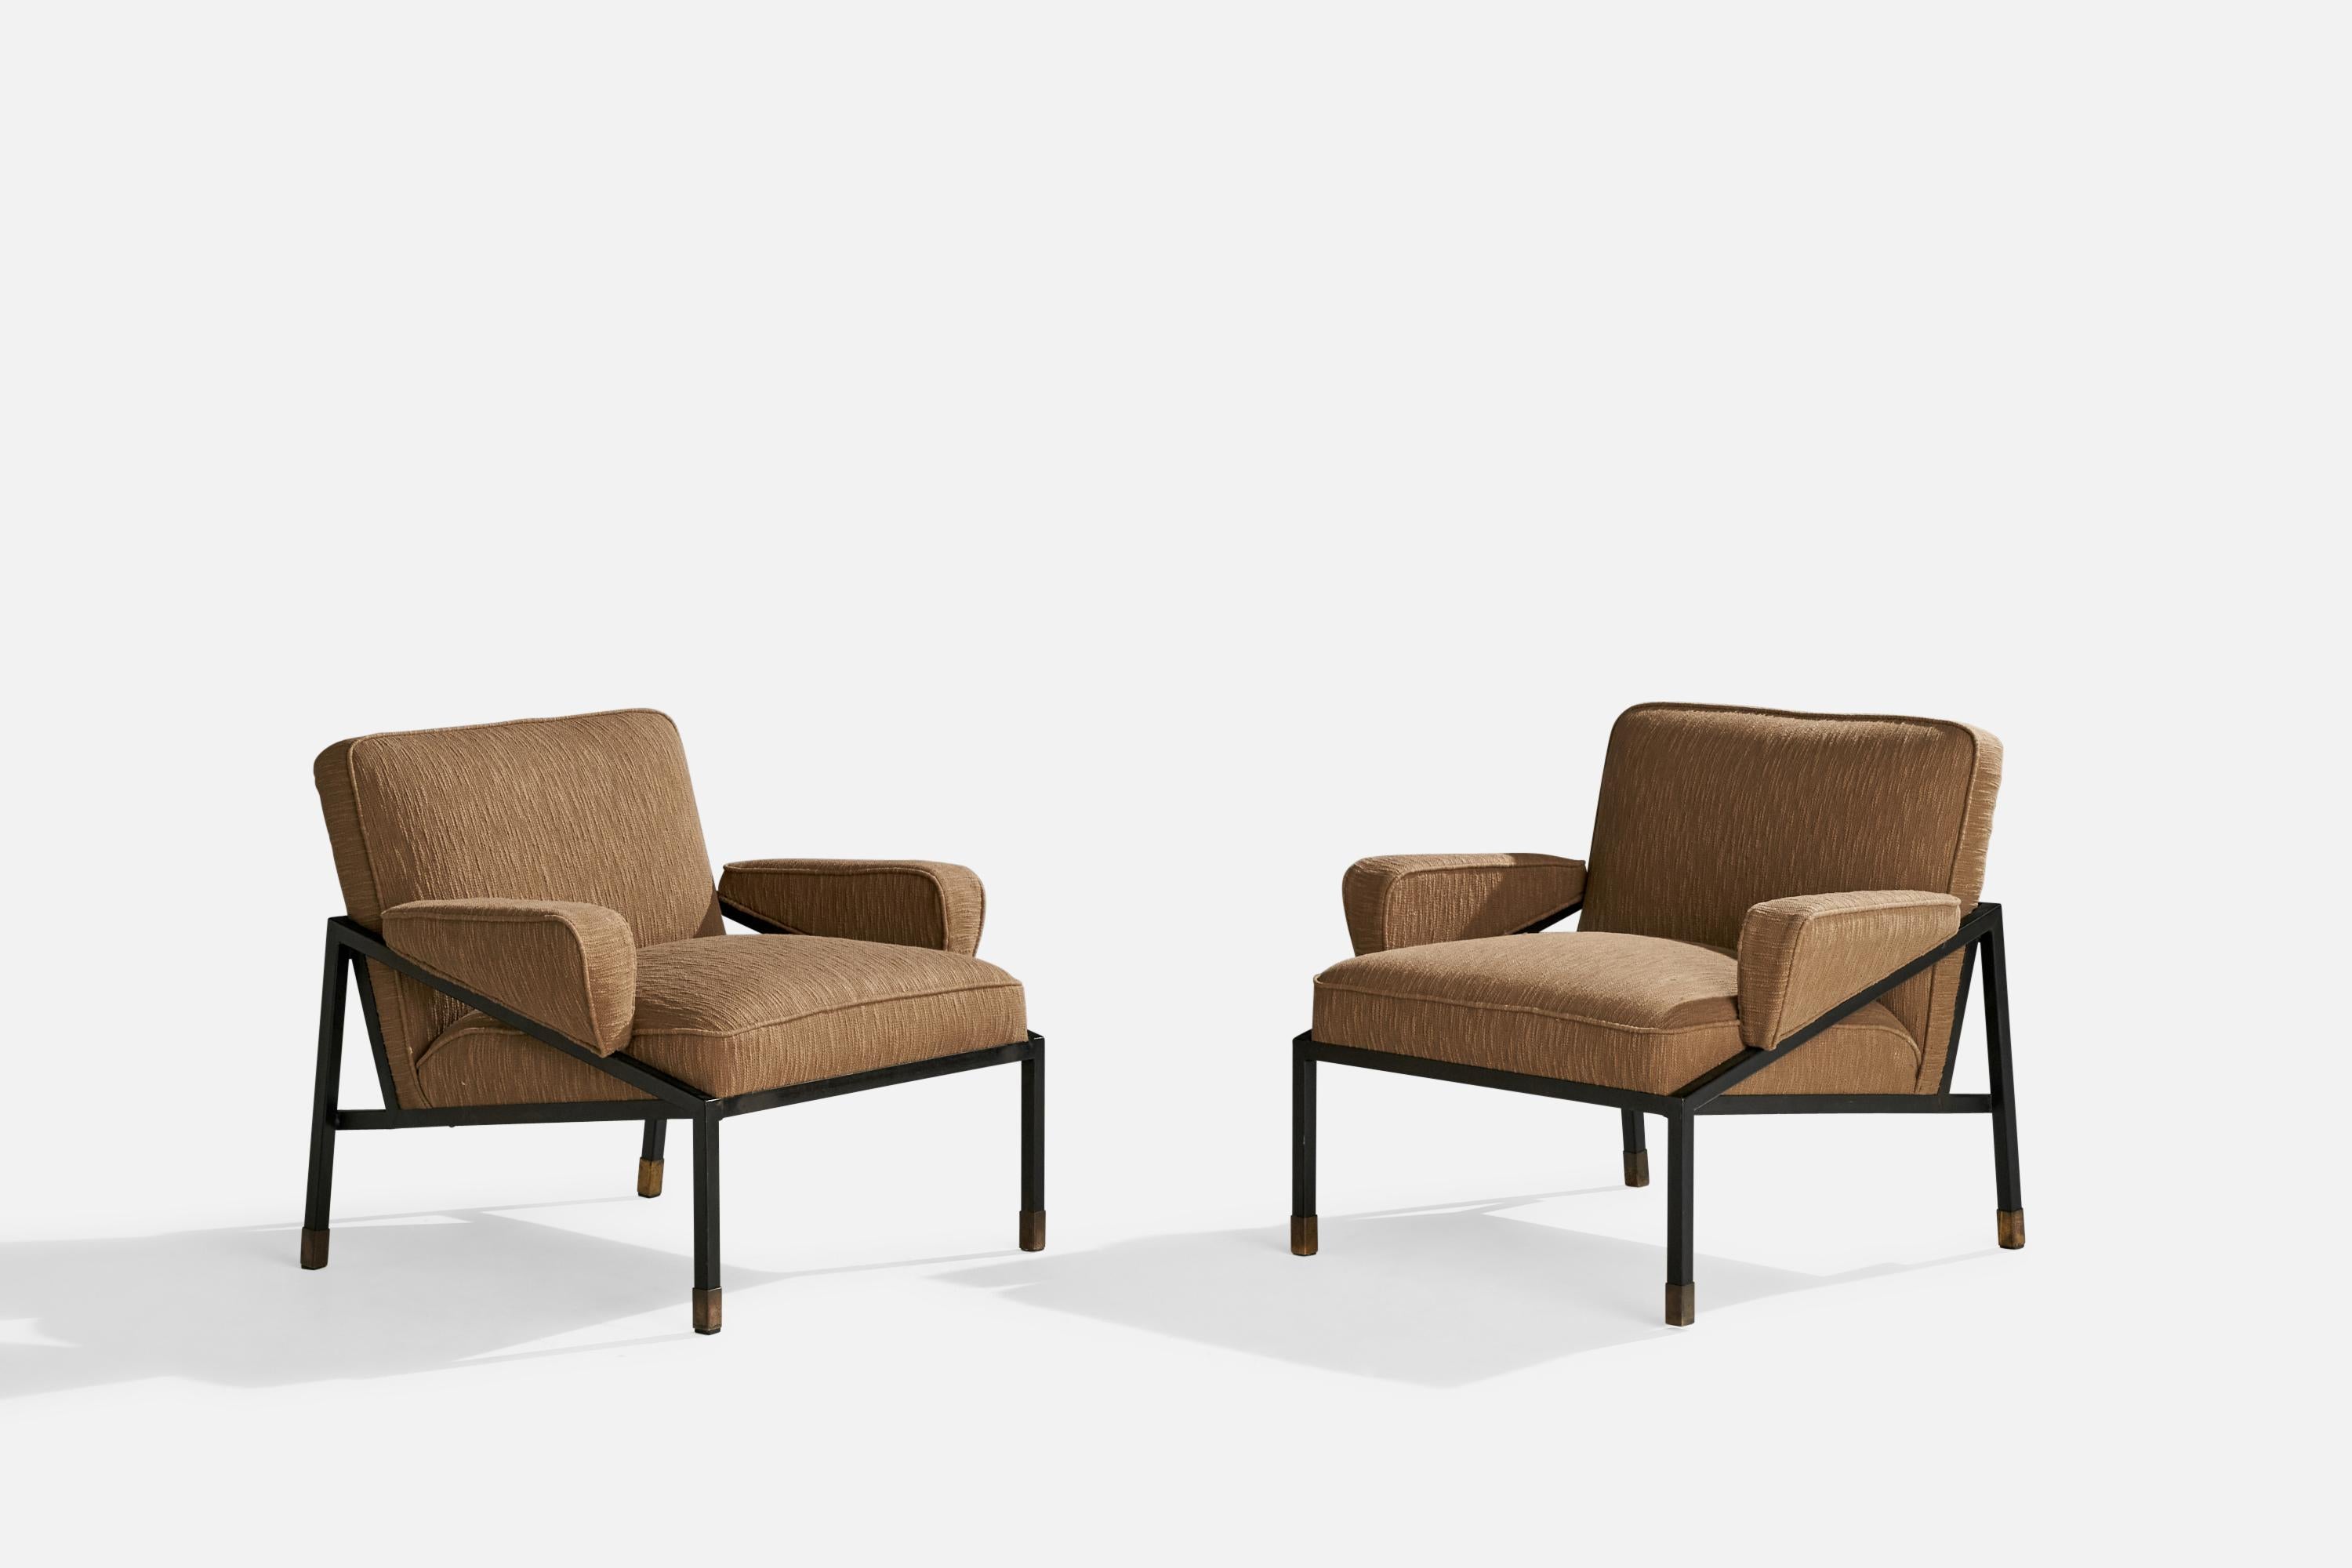 A pair of black-lacquered metal, brass and brown fabric lounge chairs designed by D.R. Bates and Jackson Gregory, Jr and produced by Vista-Costa Mesa Furniture, USA, c. 1955.

Seat height 16”.